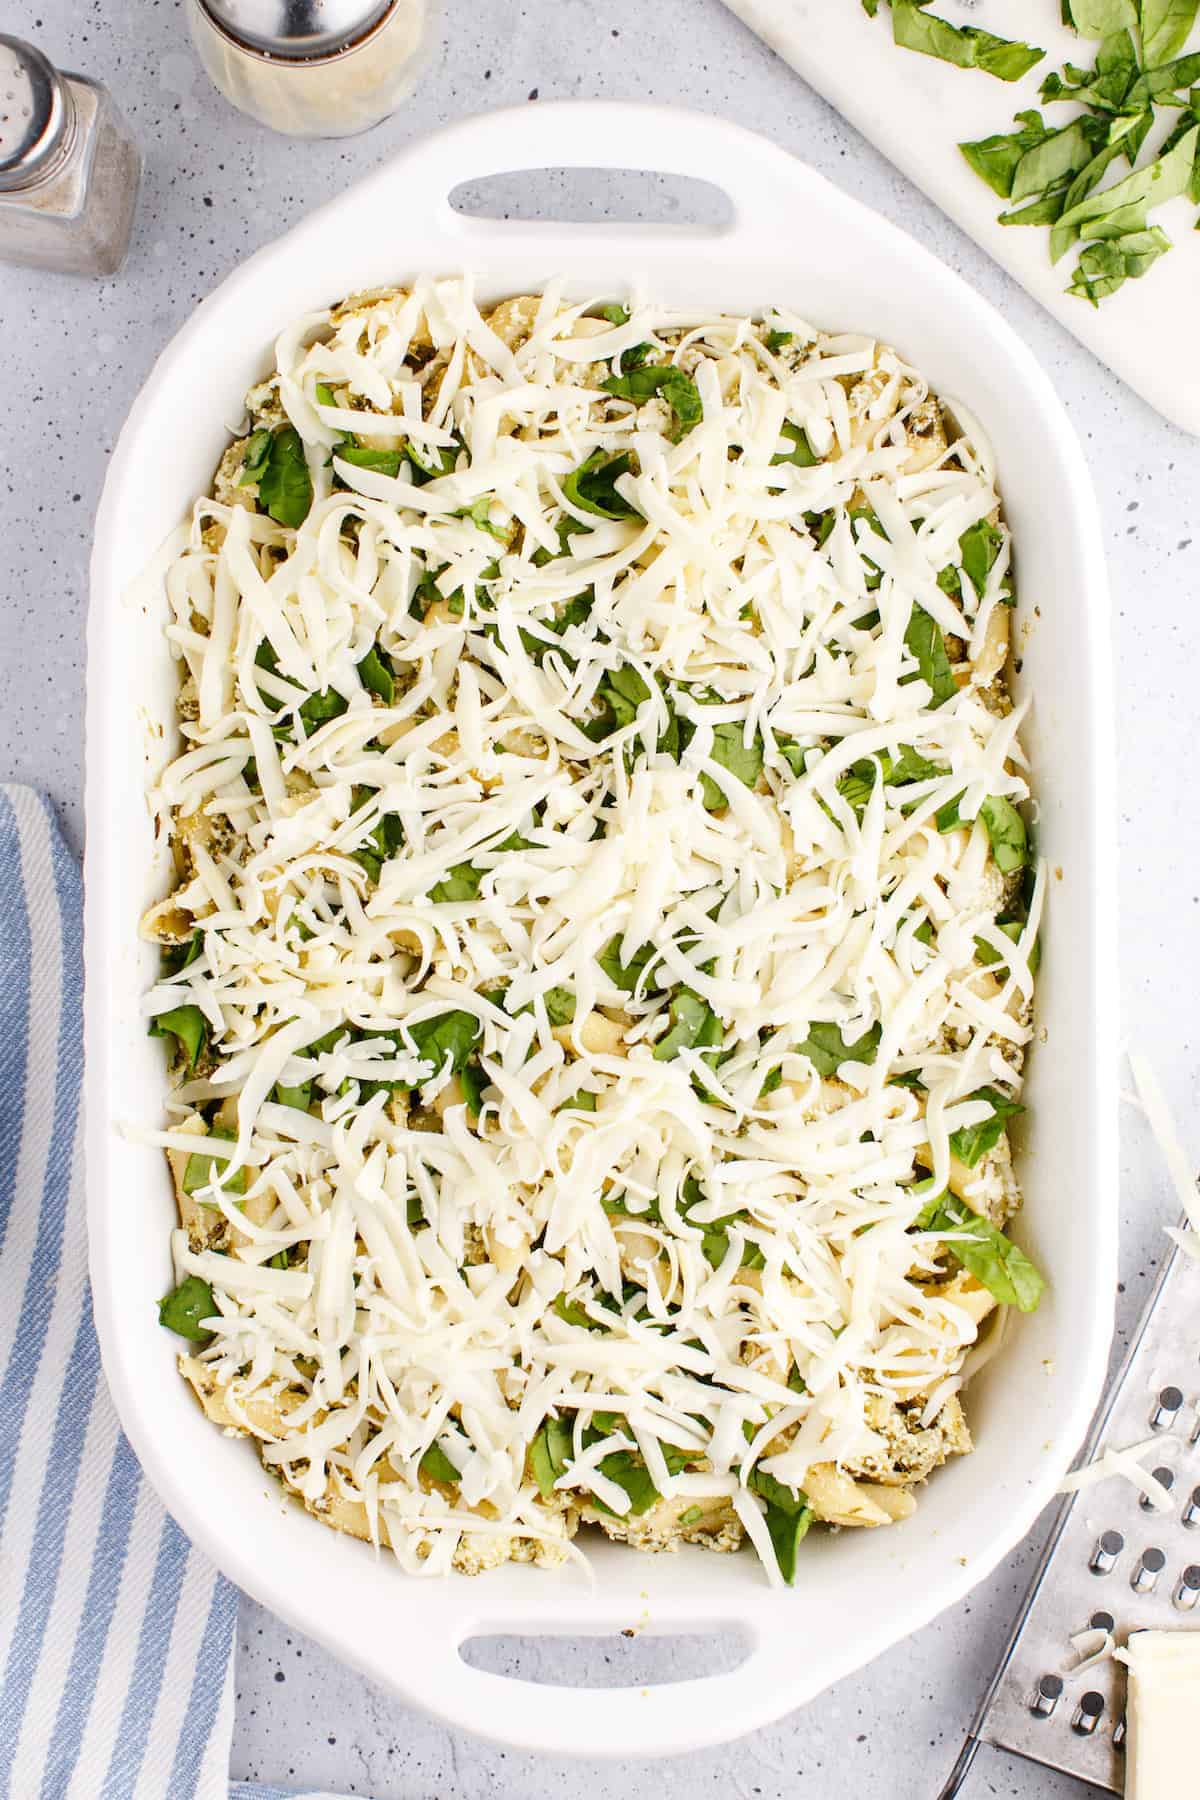 the pasta and spinach is topped with shredded mozzarella cheese